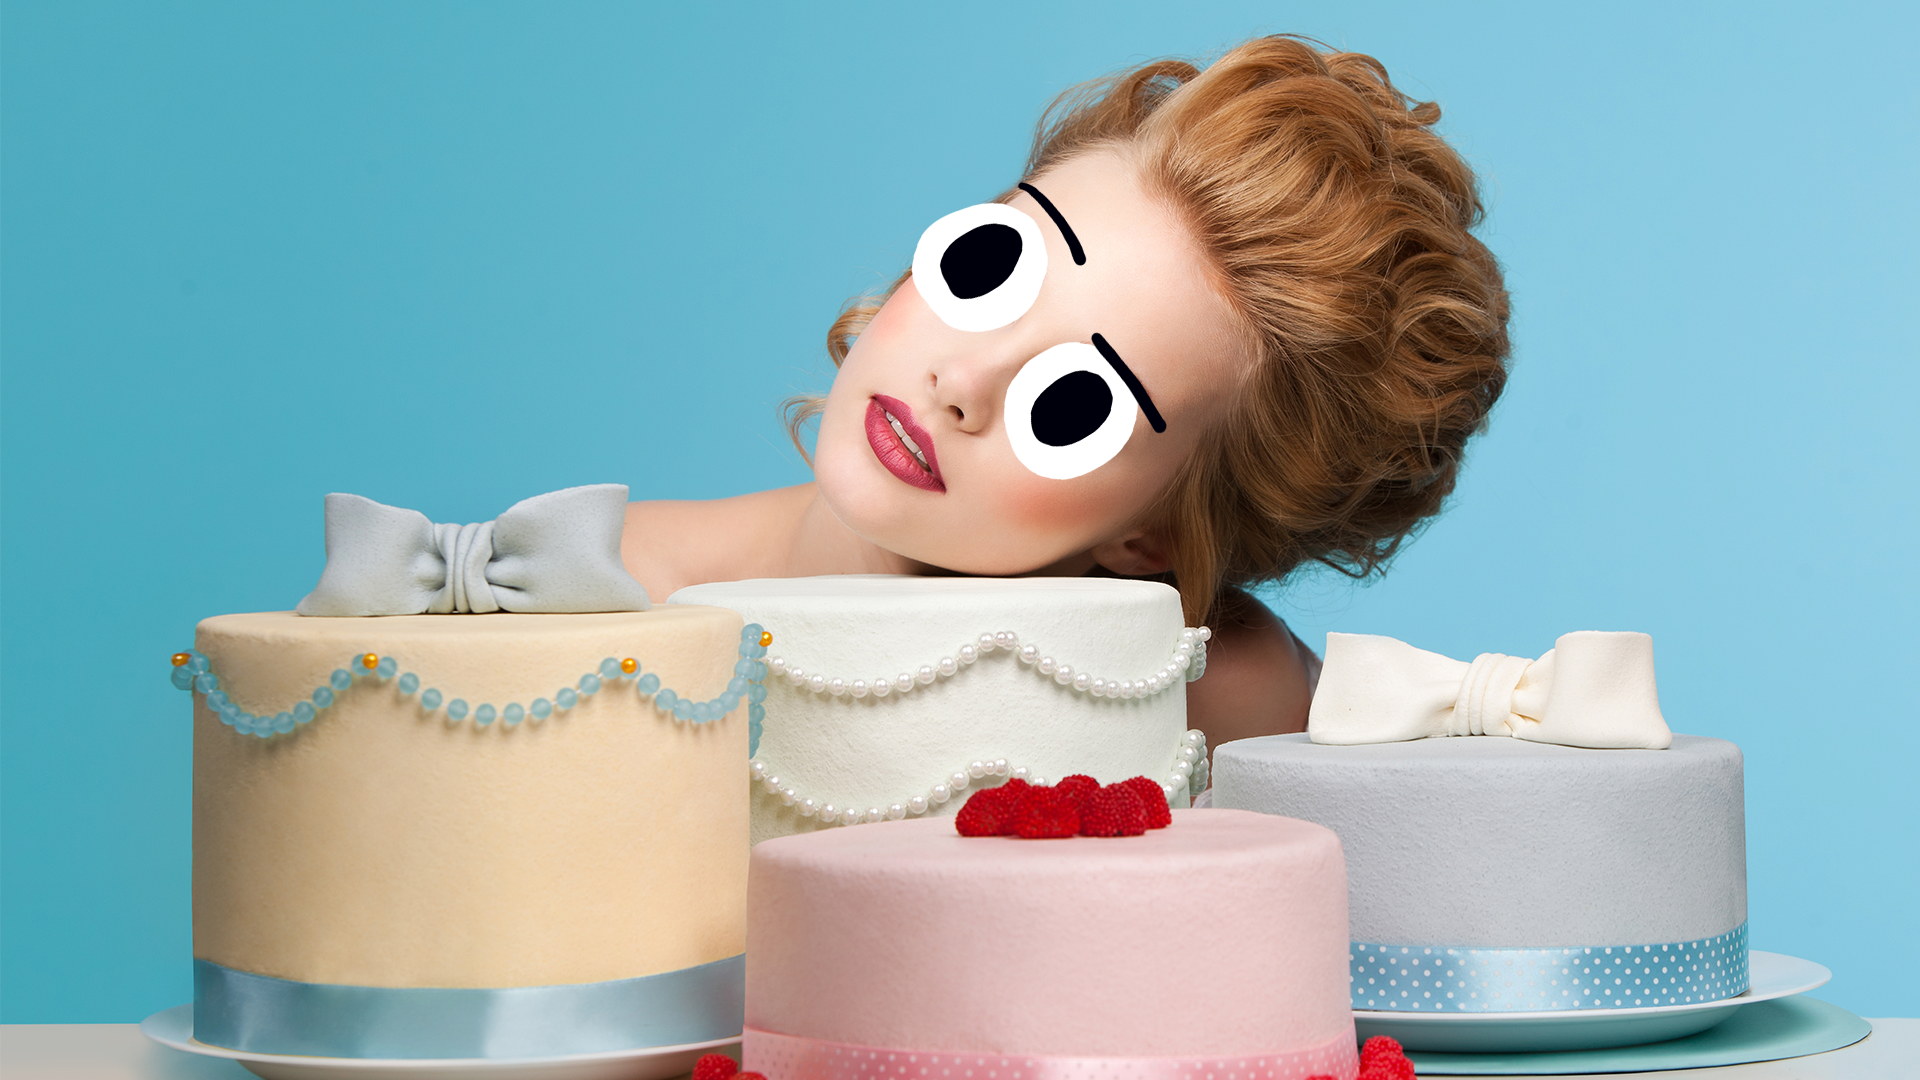 A woman examining some fancy cakes